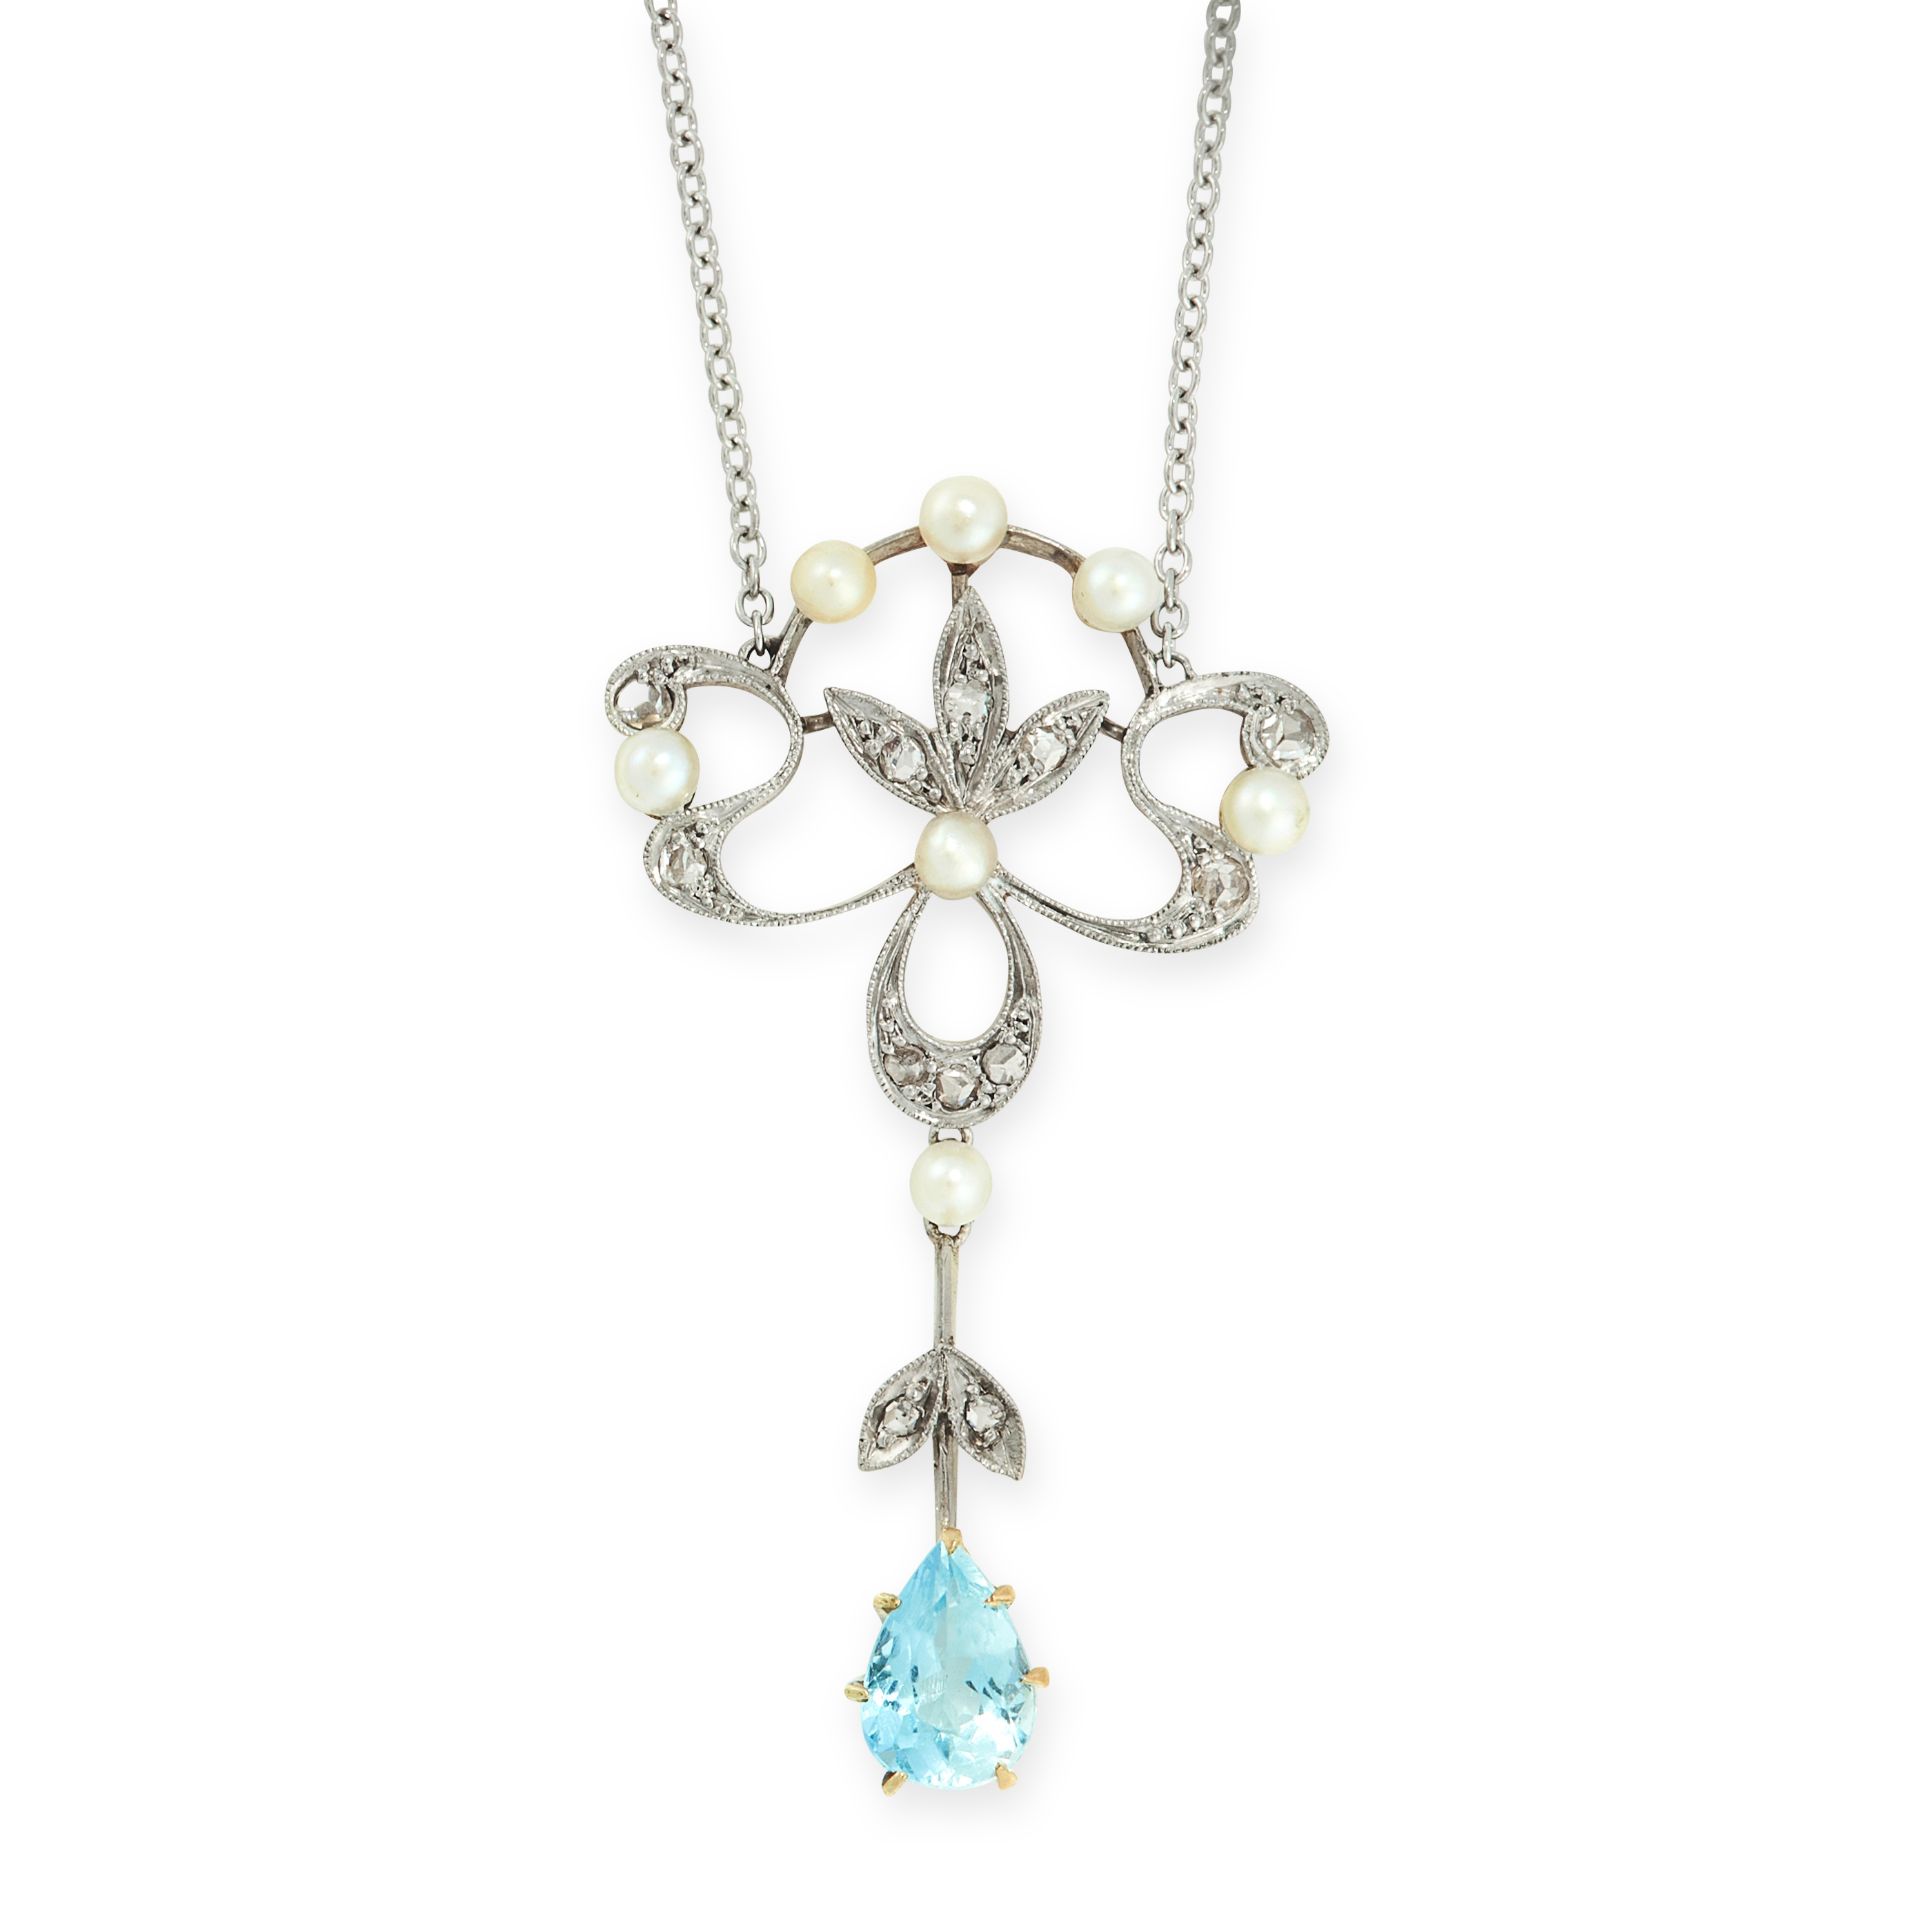 AN AQUAMARINE, PEARL AND DIAMOND PENDANT NECKLACE, EARLY 20TH CENTURY in yellow gold and platinum,